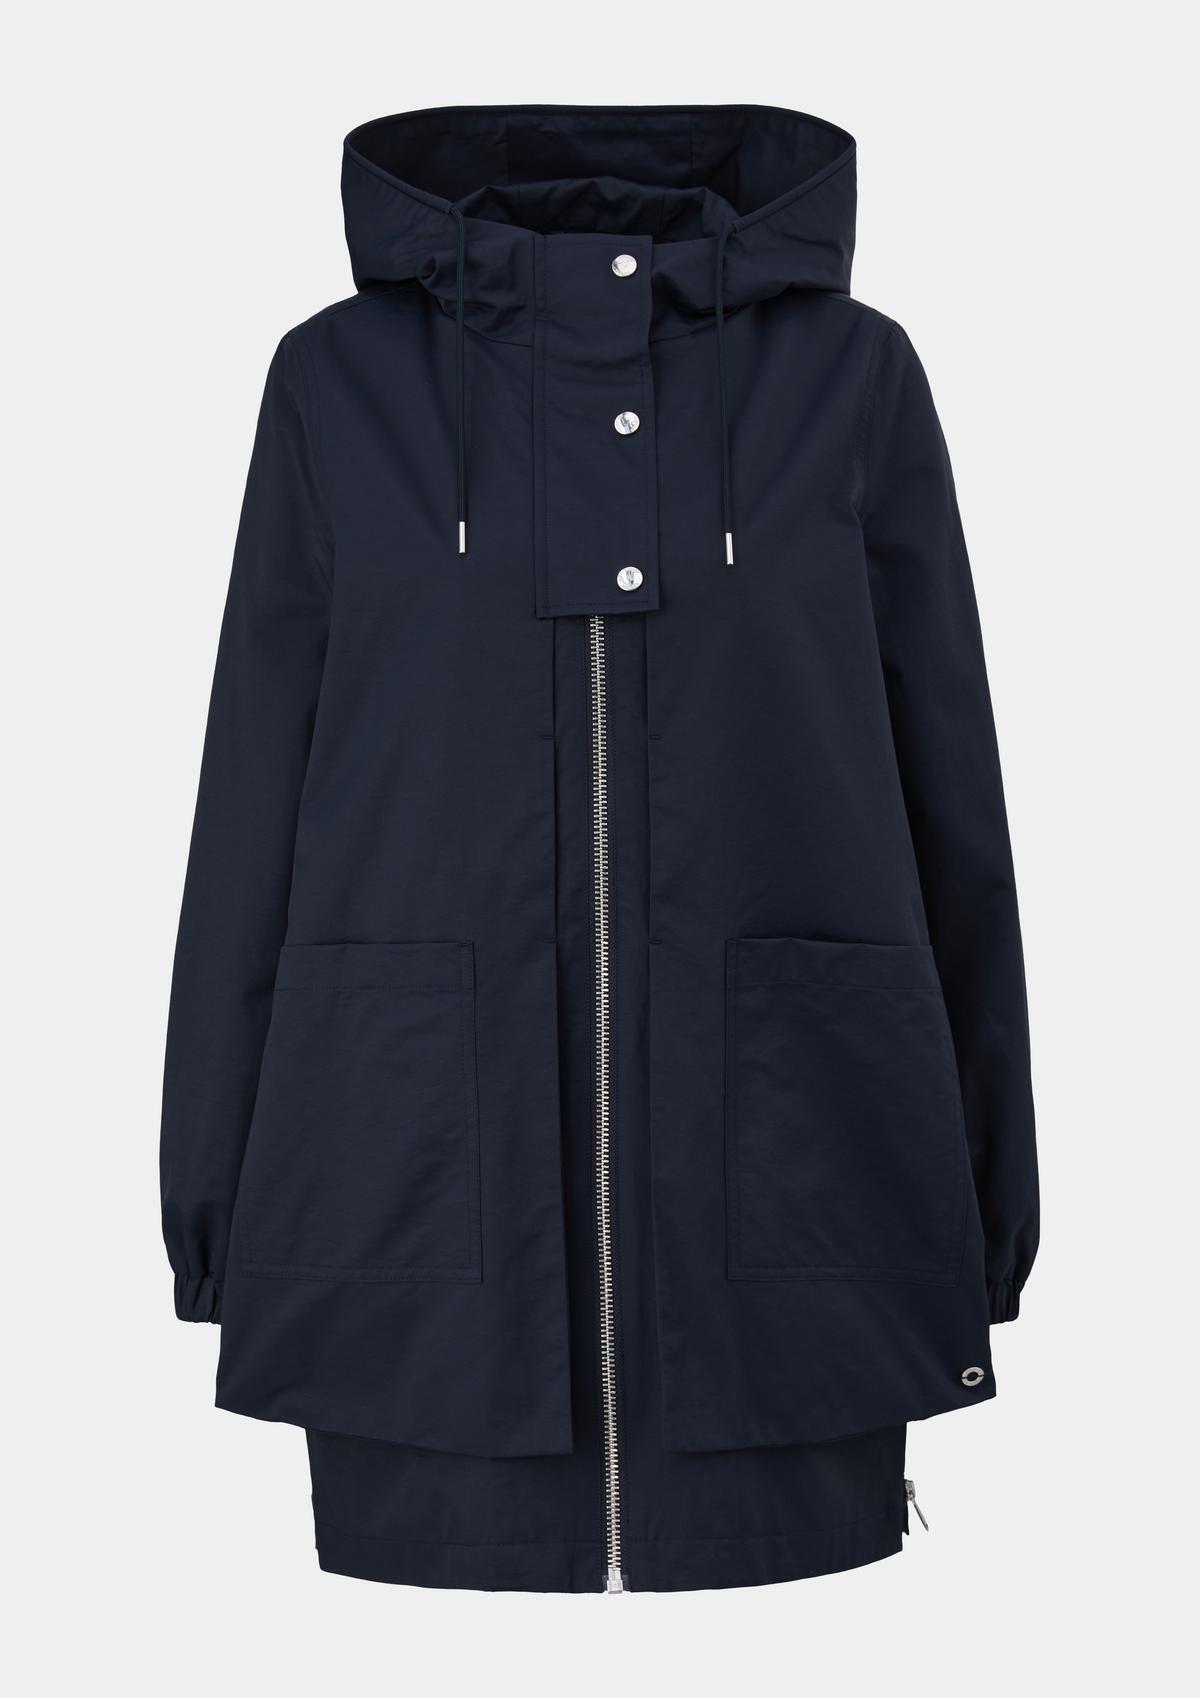 Outdoor jacket in a layered look - navy | s.Oliver